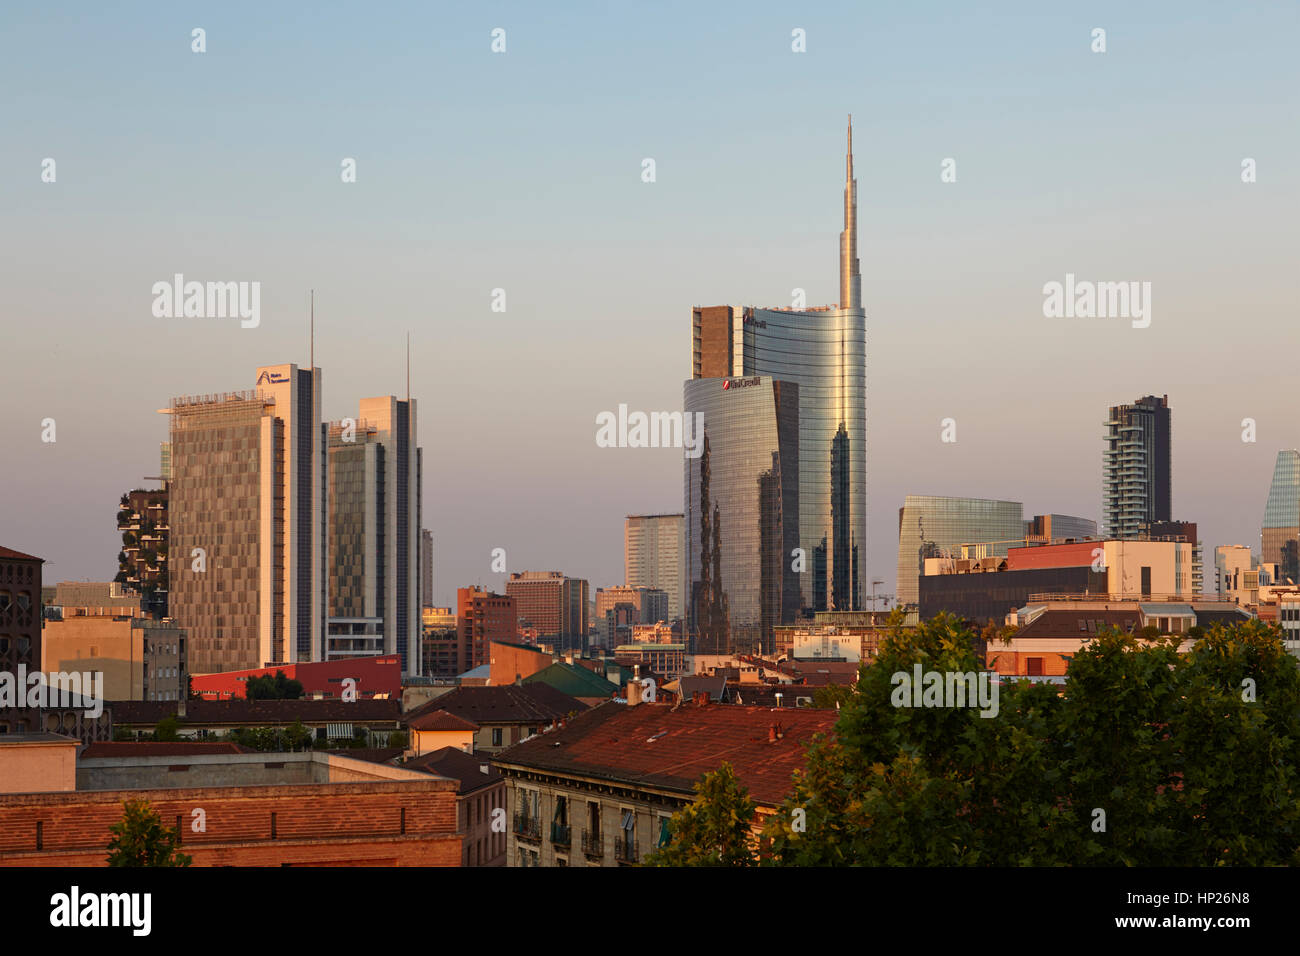 View of Unicredit Tower in Porta Nuova district, Milan, Italy Stock Photo